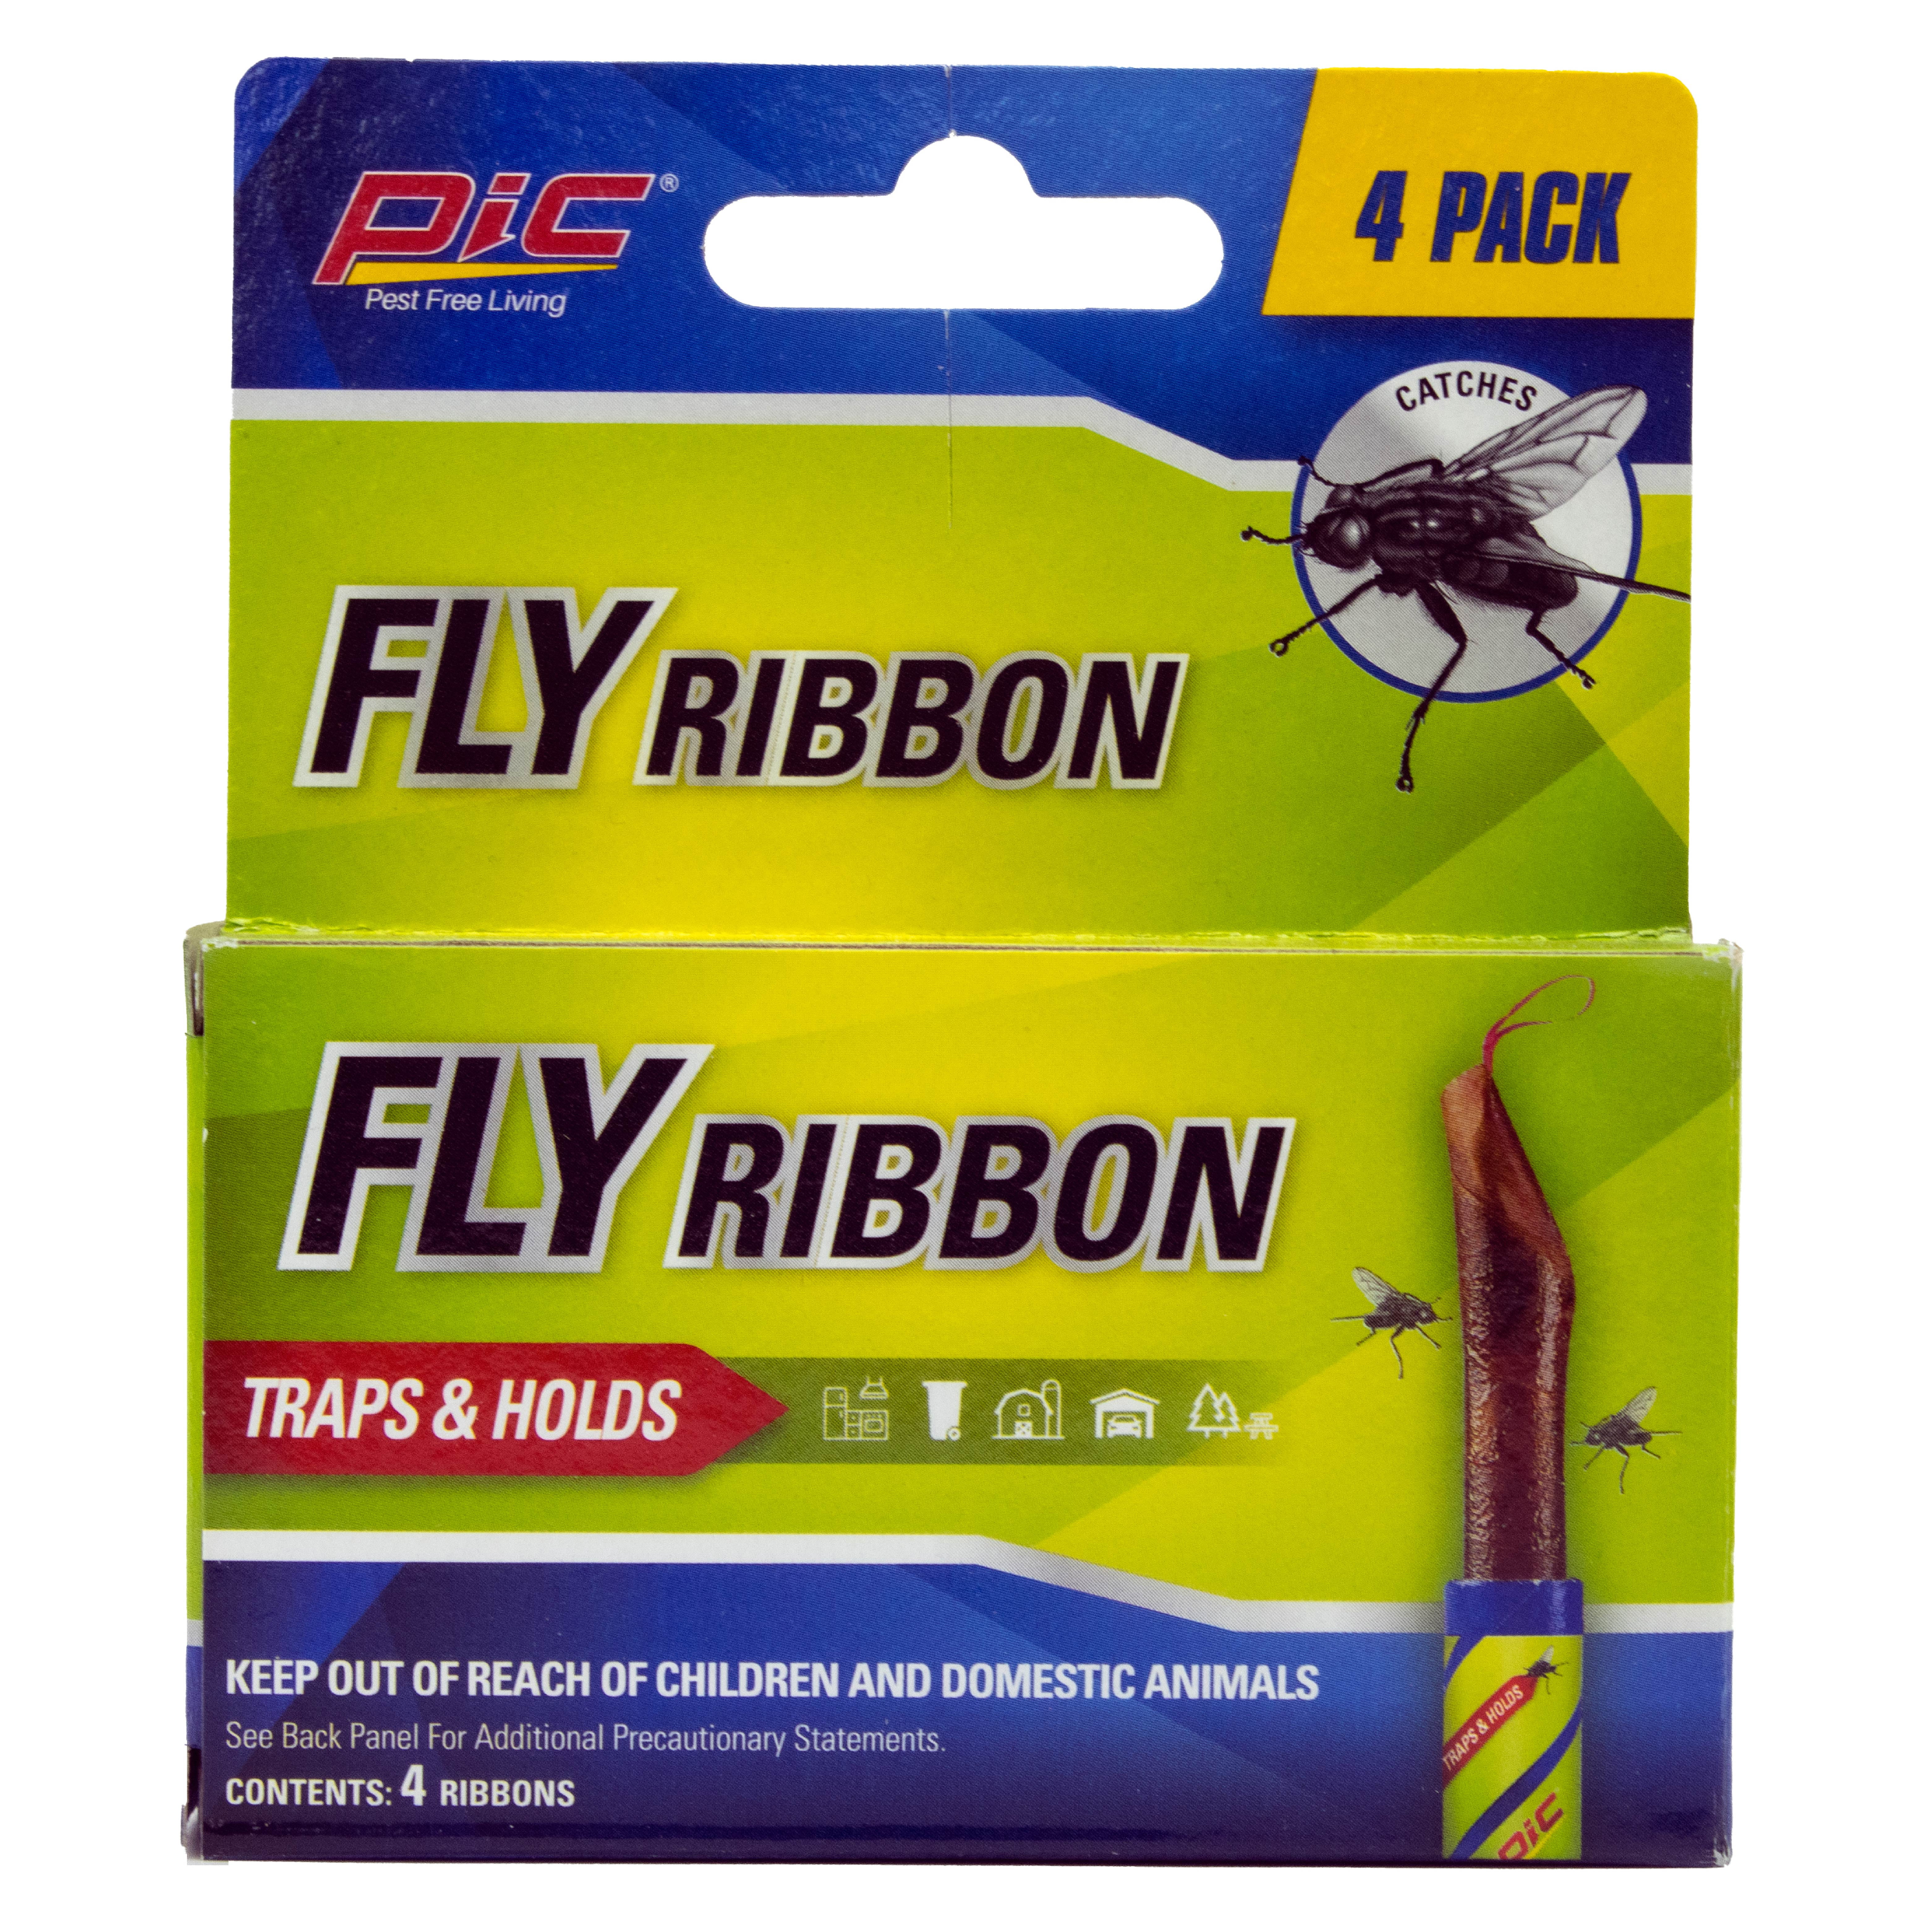 Bowake 4 Rolls Sticky Fly Paper Eliminate Flies Insect Bug Glue Paper  Catcher Trap